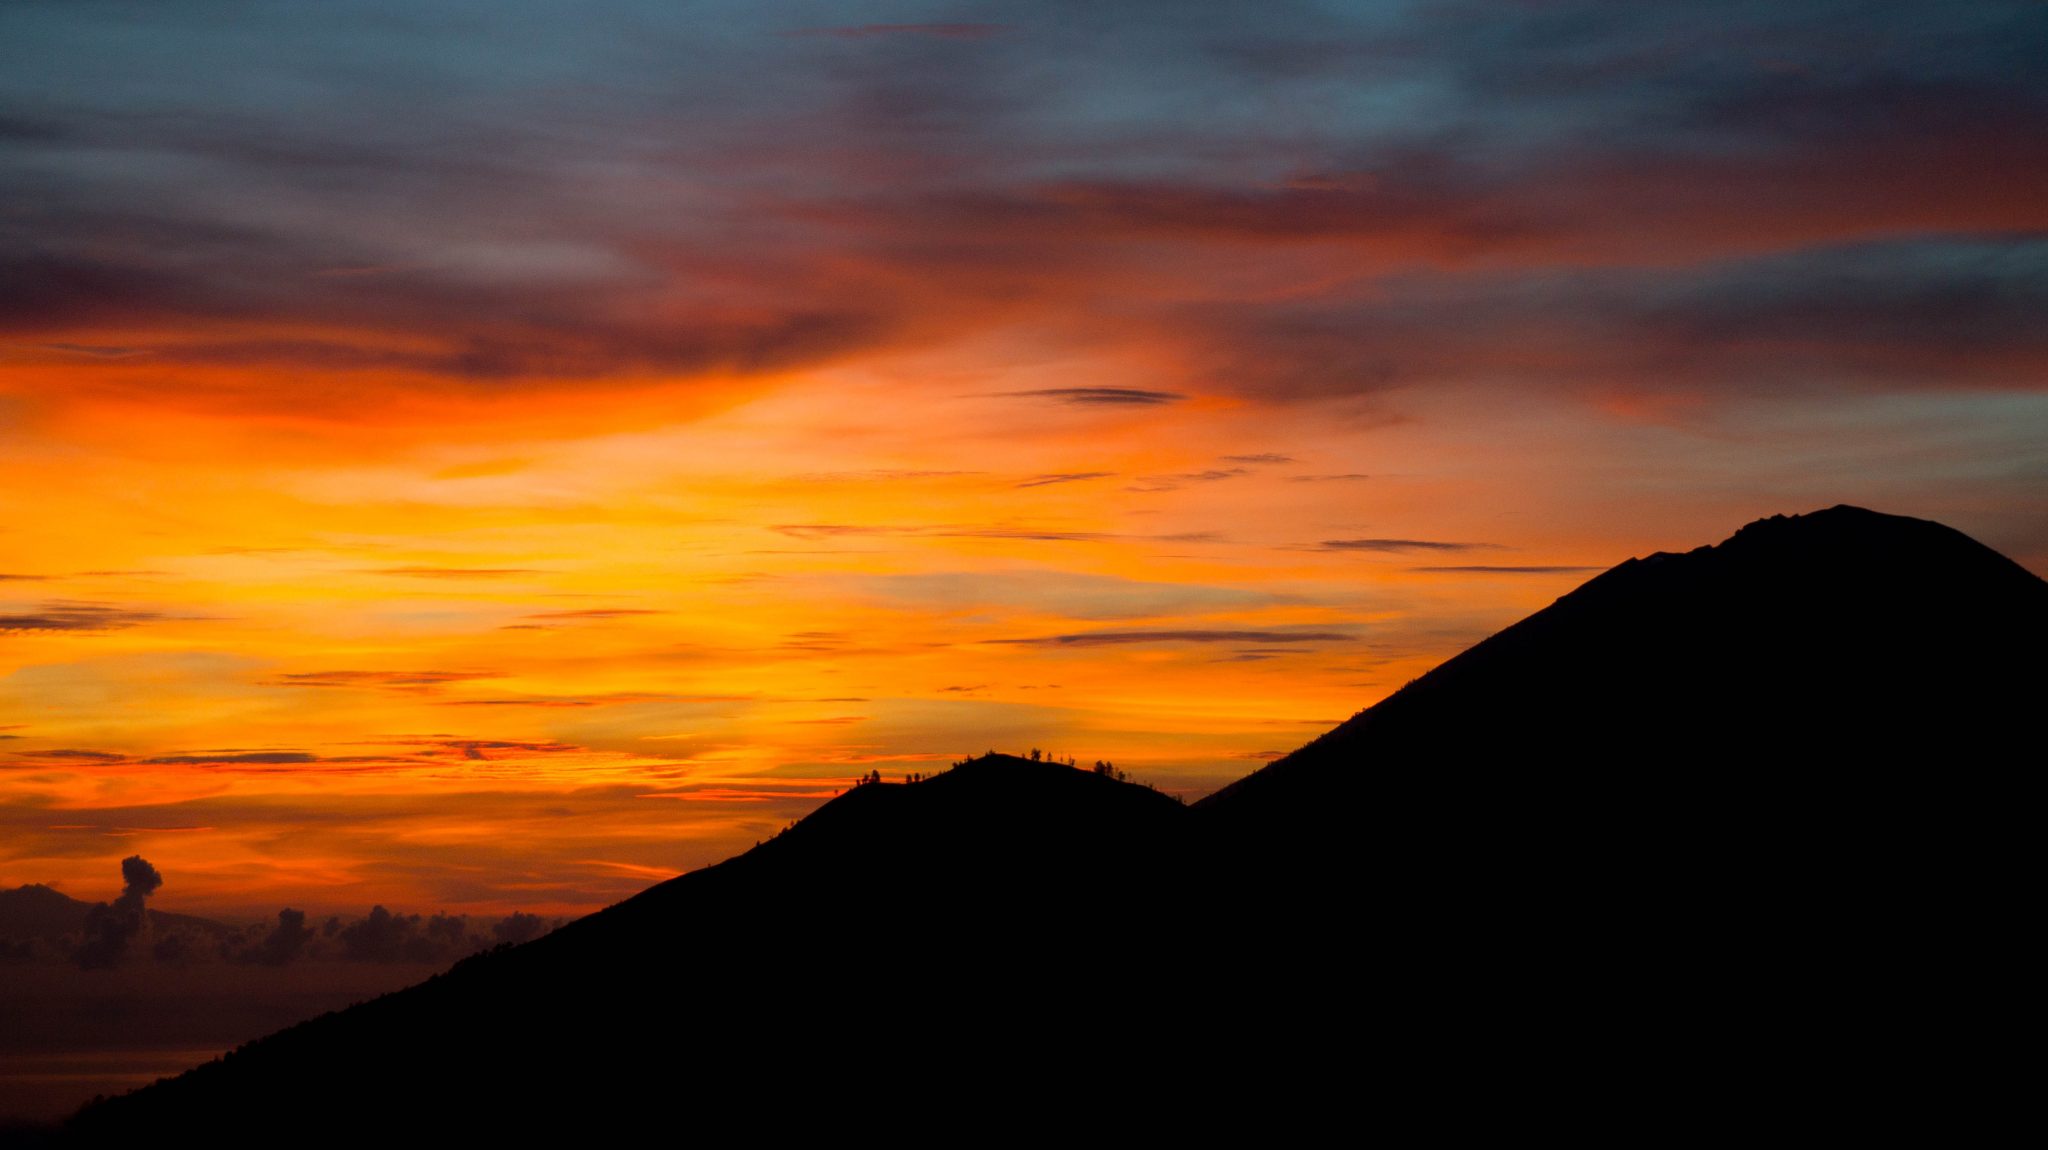 The silhouette of Mount Batur in Bali, Indonesia against a deep orange sunset.